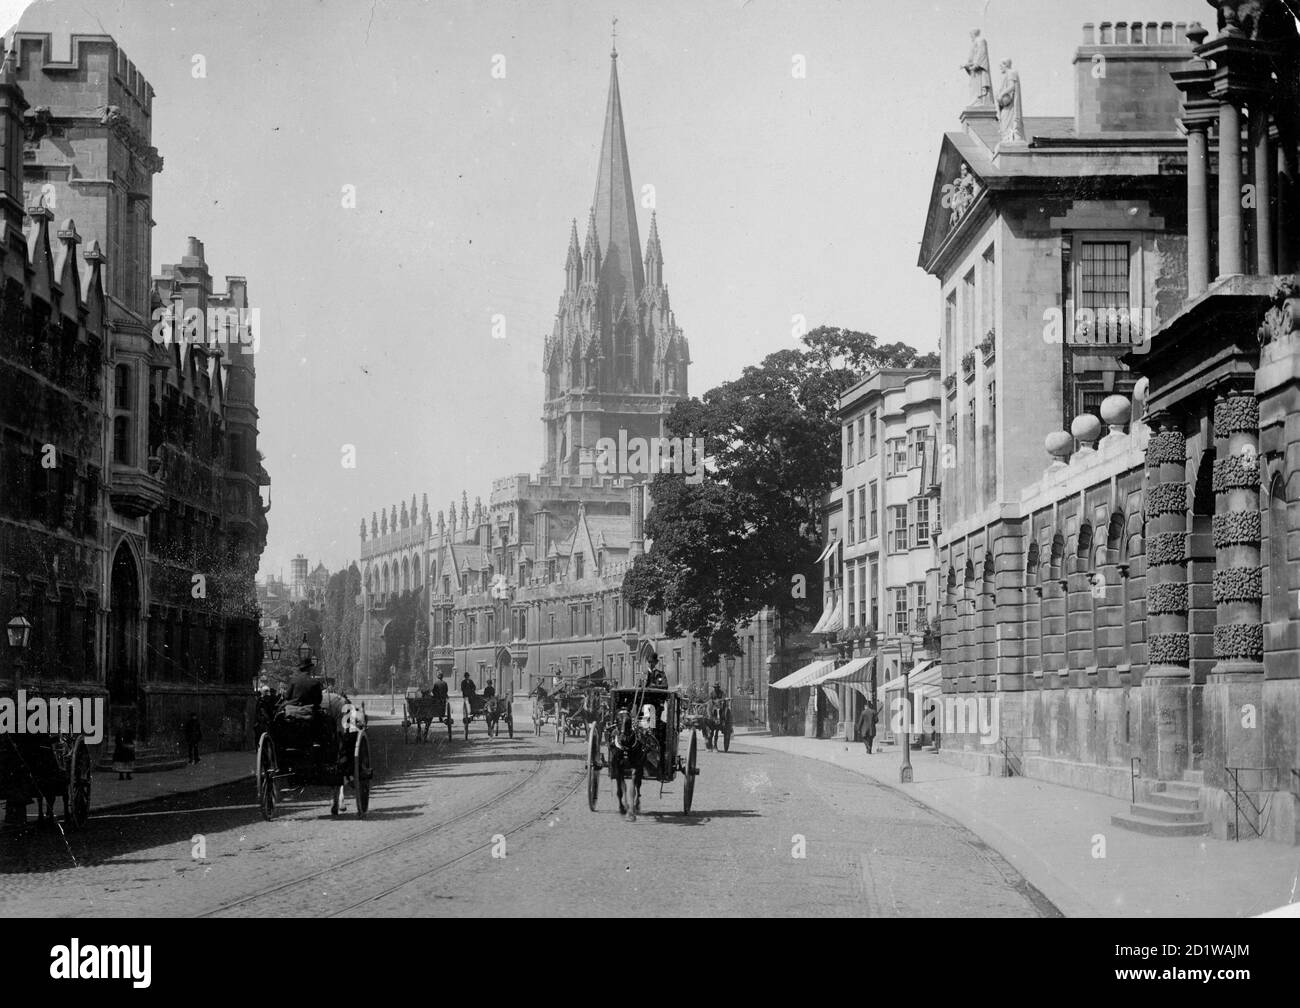 High Street, Oxford, Oxfordshire. Looking west along the High Street from Queen's College showing several horse drawn Hansom Cabs in the foreground. The south facade of All Souls College, and the impressive spire of St Mary the Virgin beyond, can be seen further along the street. Stock Photo